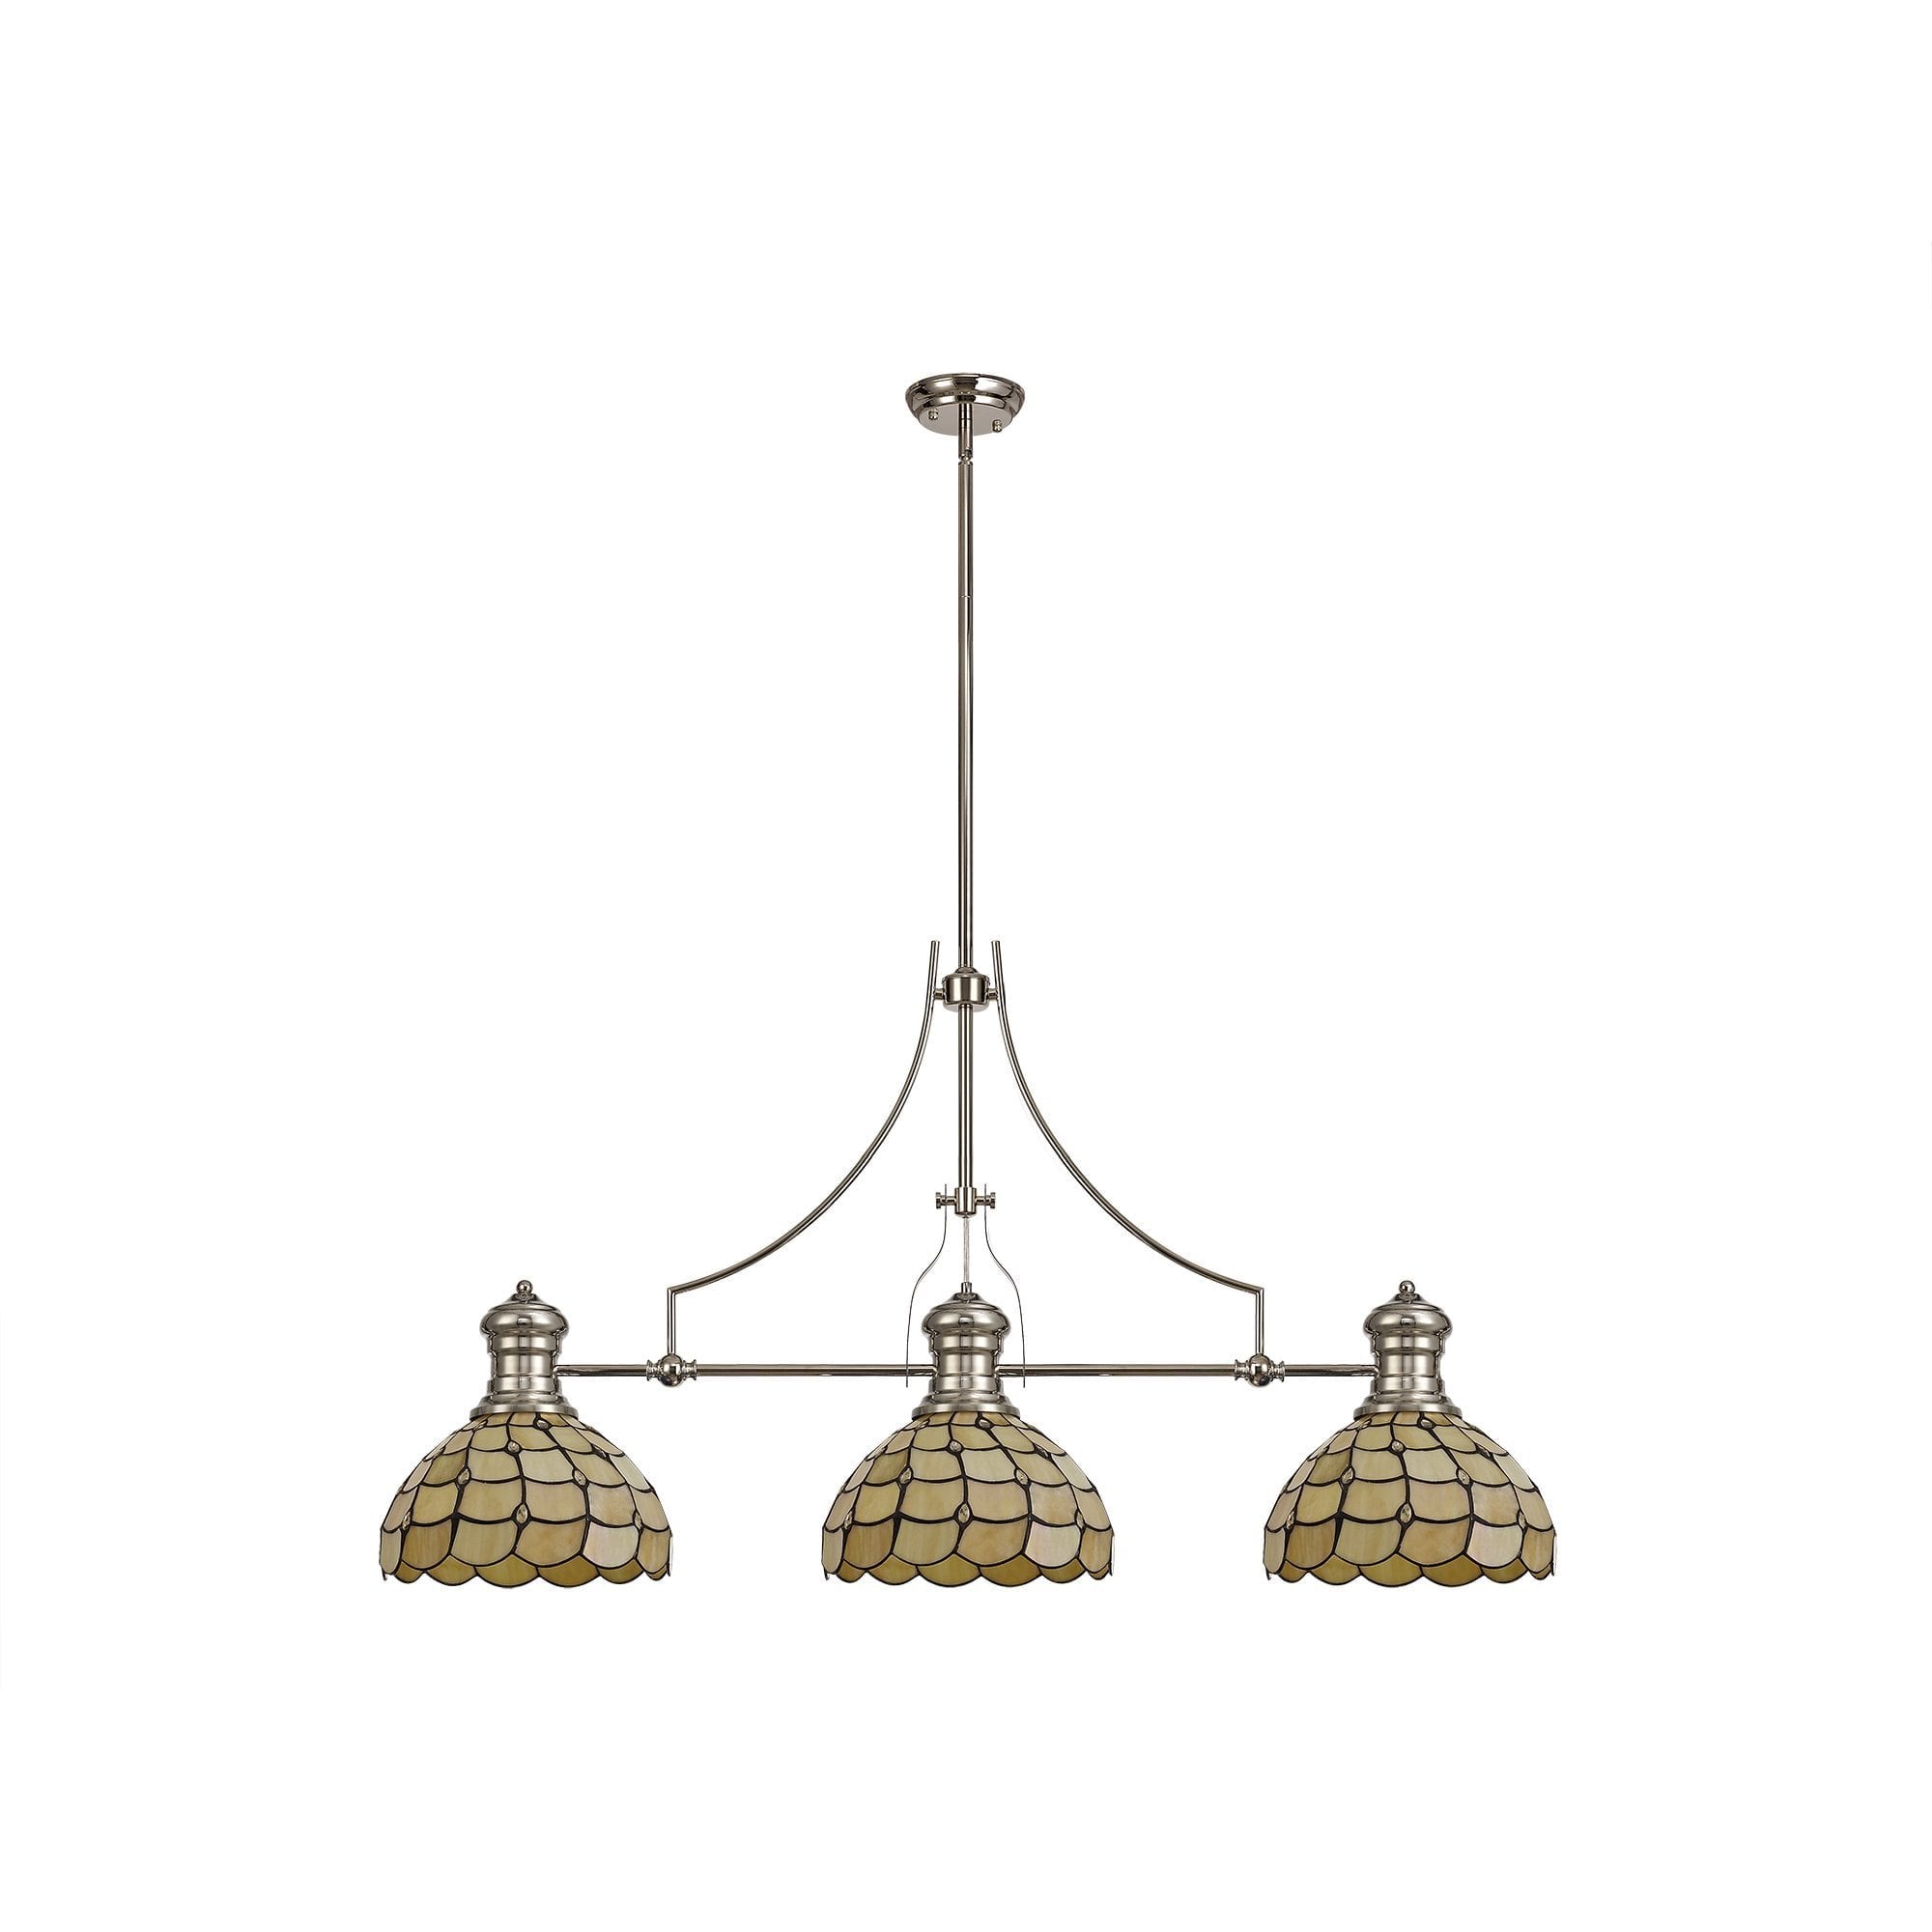 3 Light Telescopic Pendant E27 With 30cm Tiffany Shade, Polished Nickel/Beige/Clear Crystal